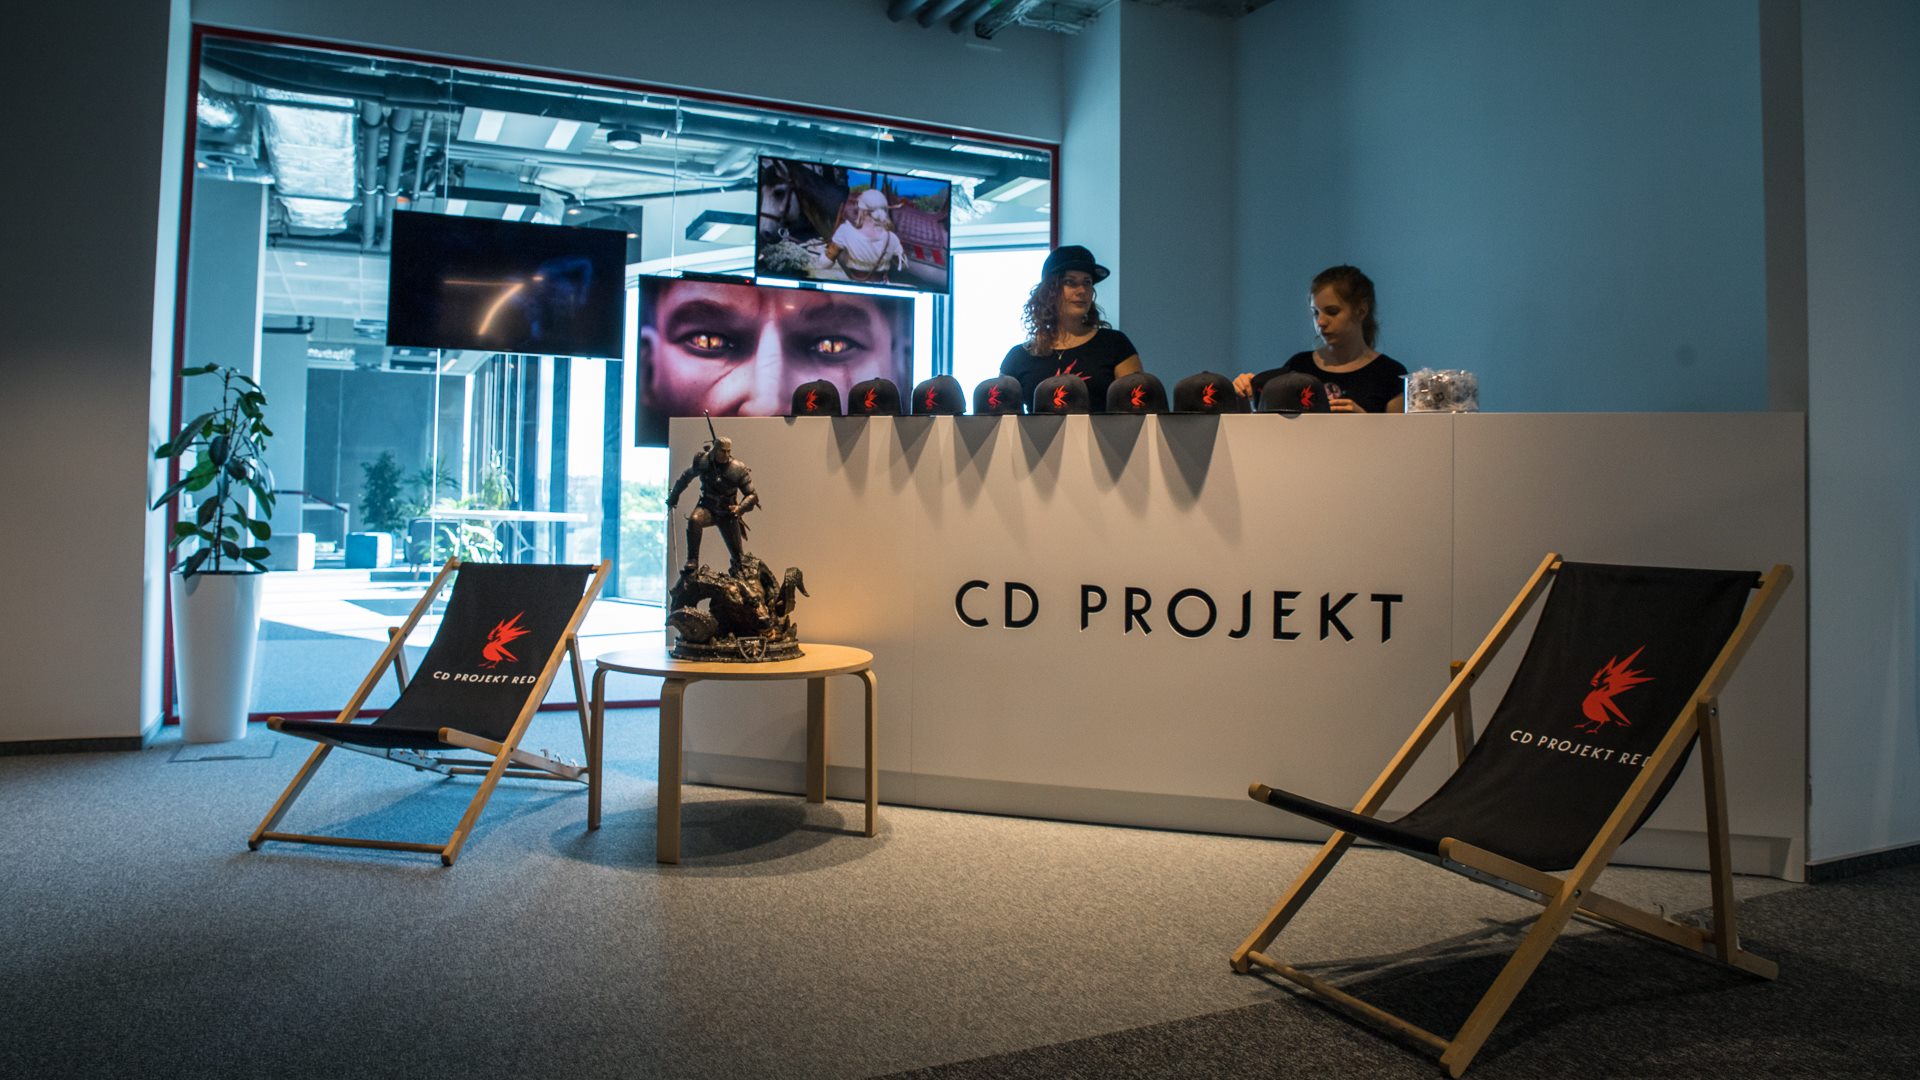 About CD PROJEKT RED